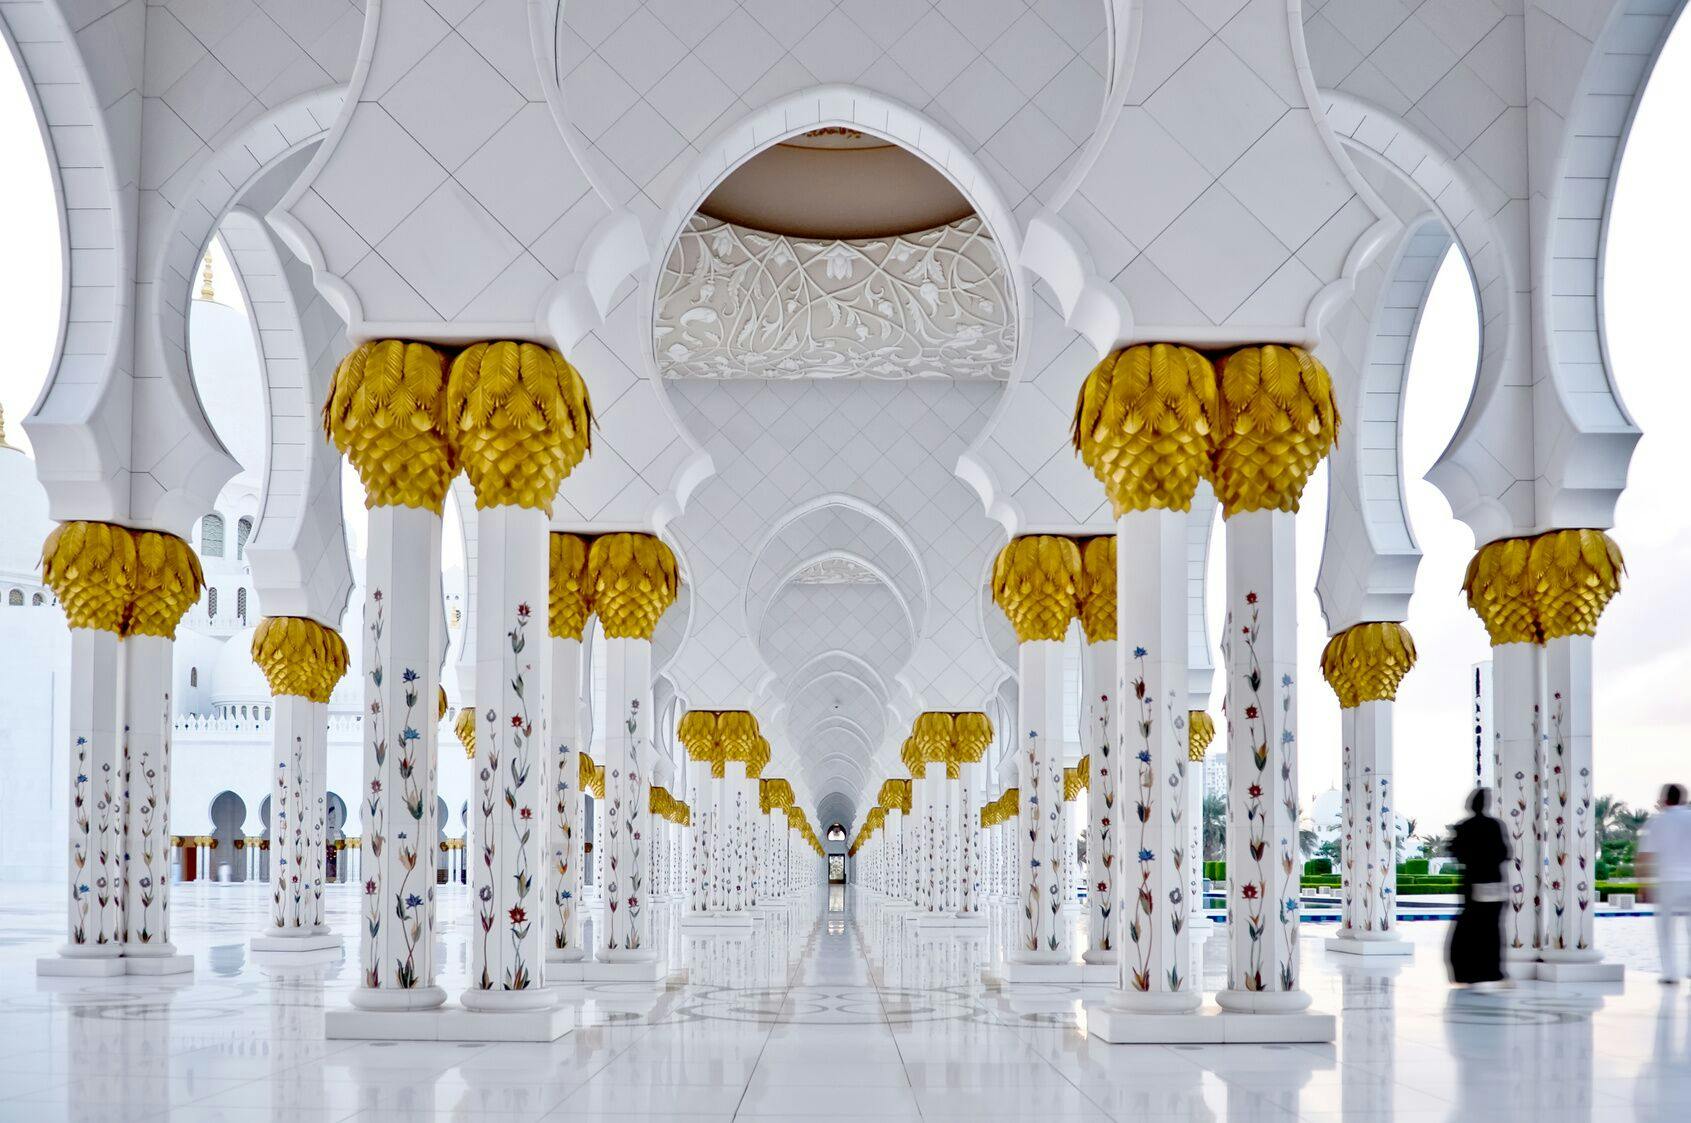 Day trip of Abu Dhabi and its royal palaces from Dubai